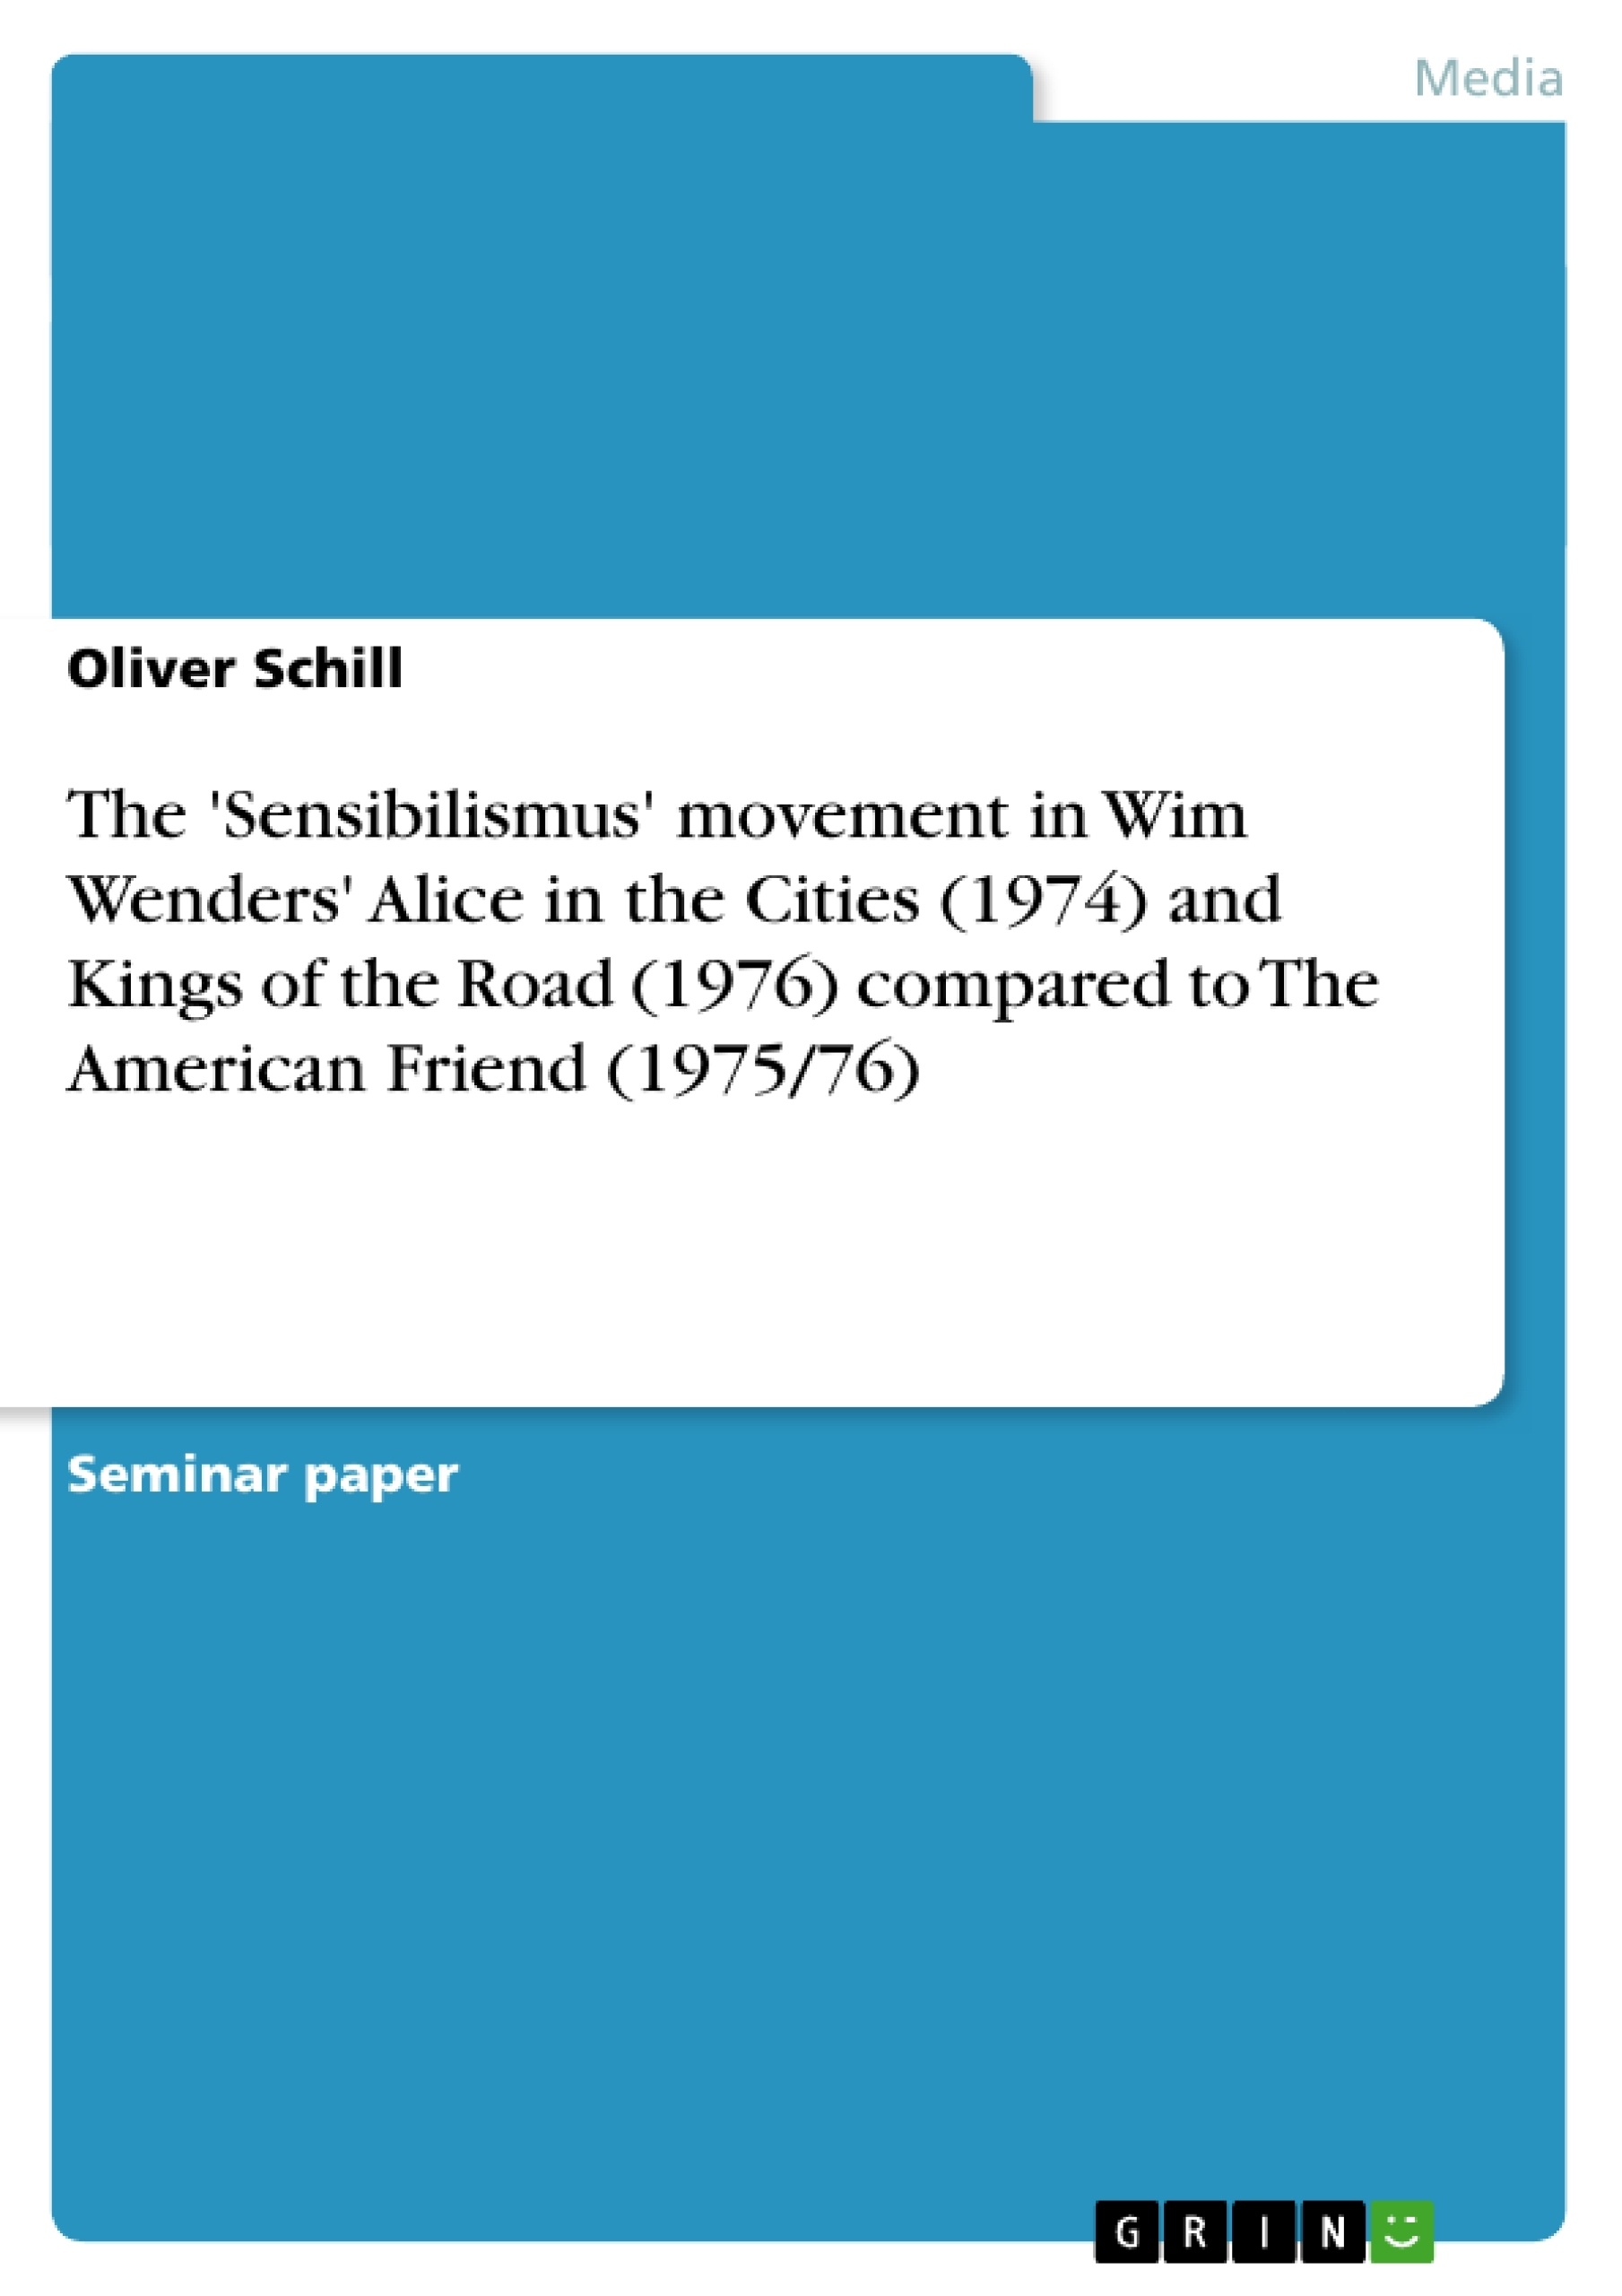 Titre: The 'Sensibilismus' movement in Wim Wenders' Alice in the Cities (1974) and Kings of the Road (1976) compared to The American Friend (1975/76)